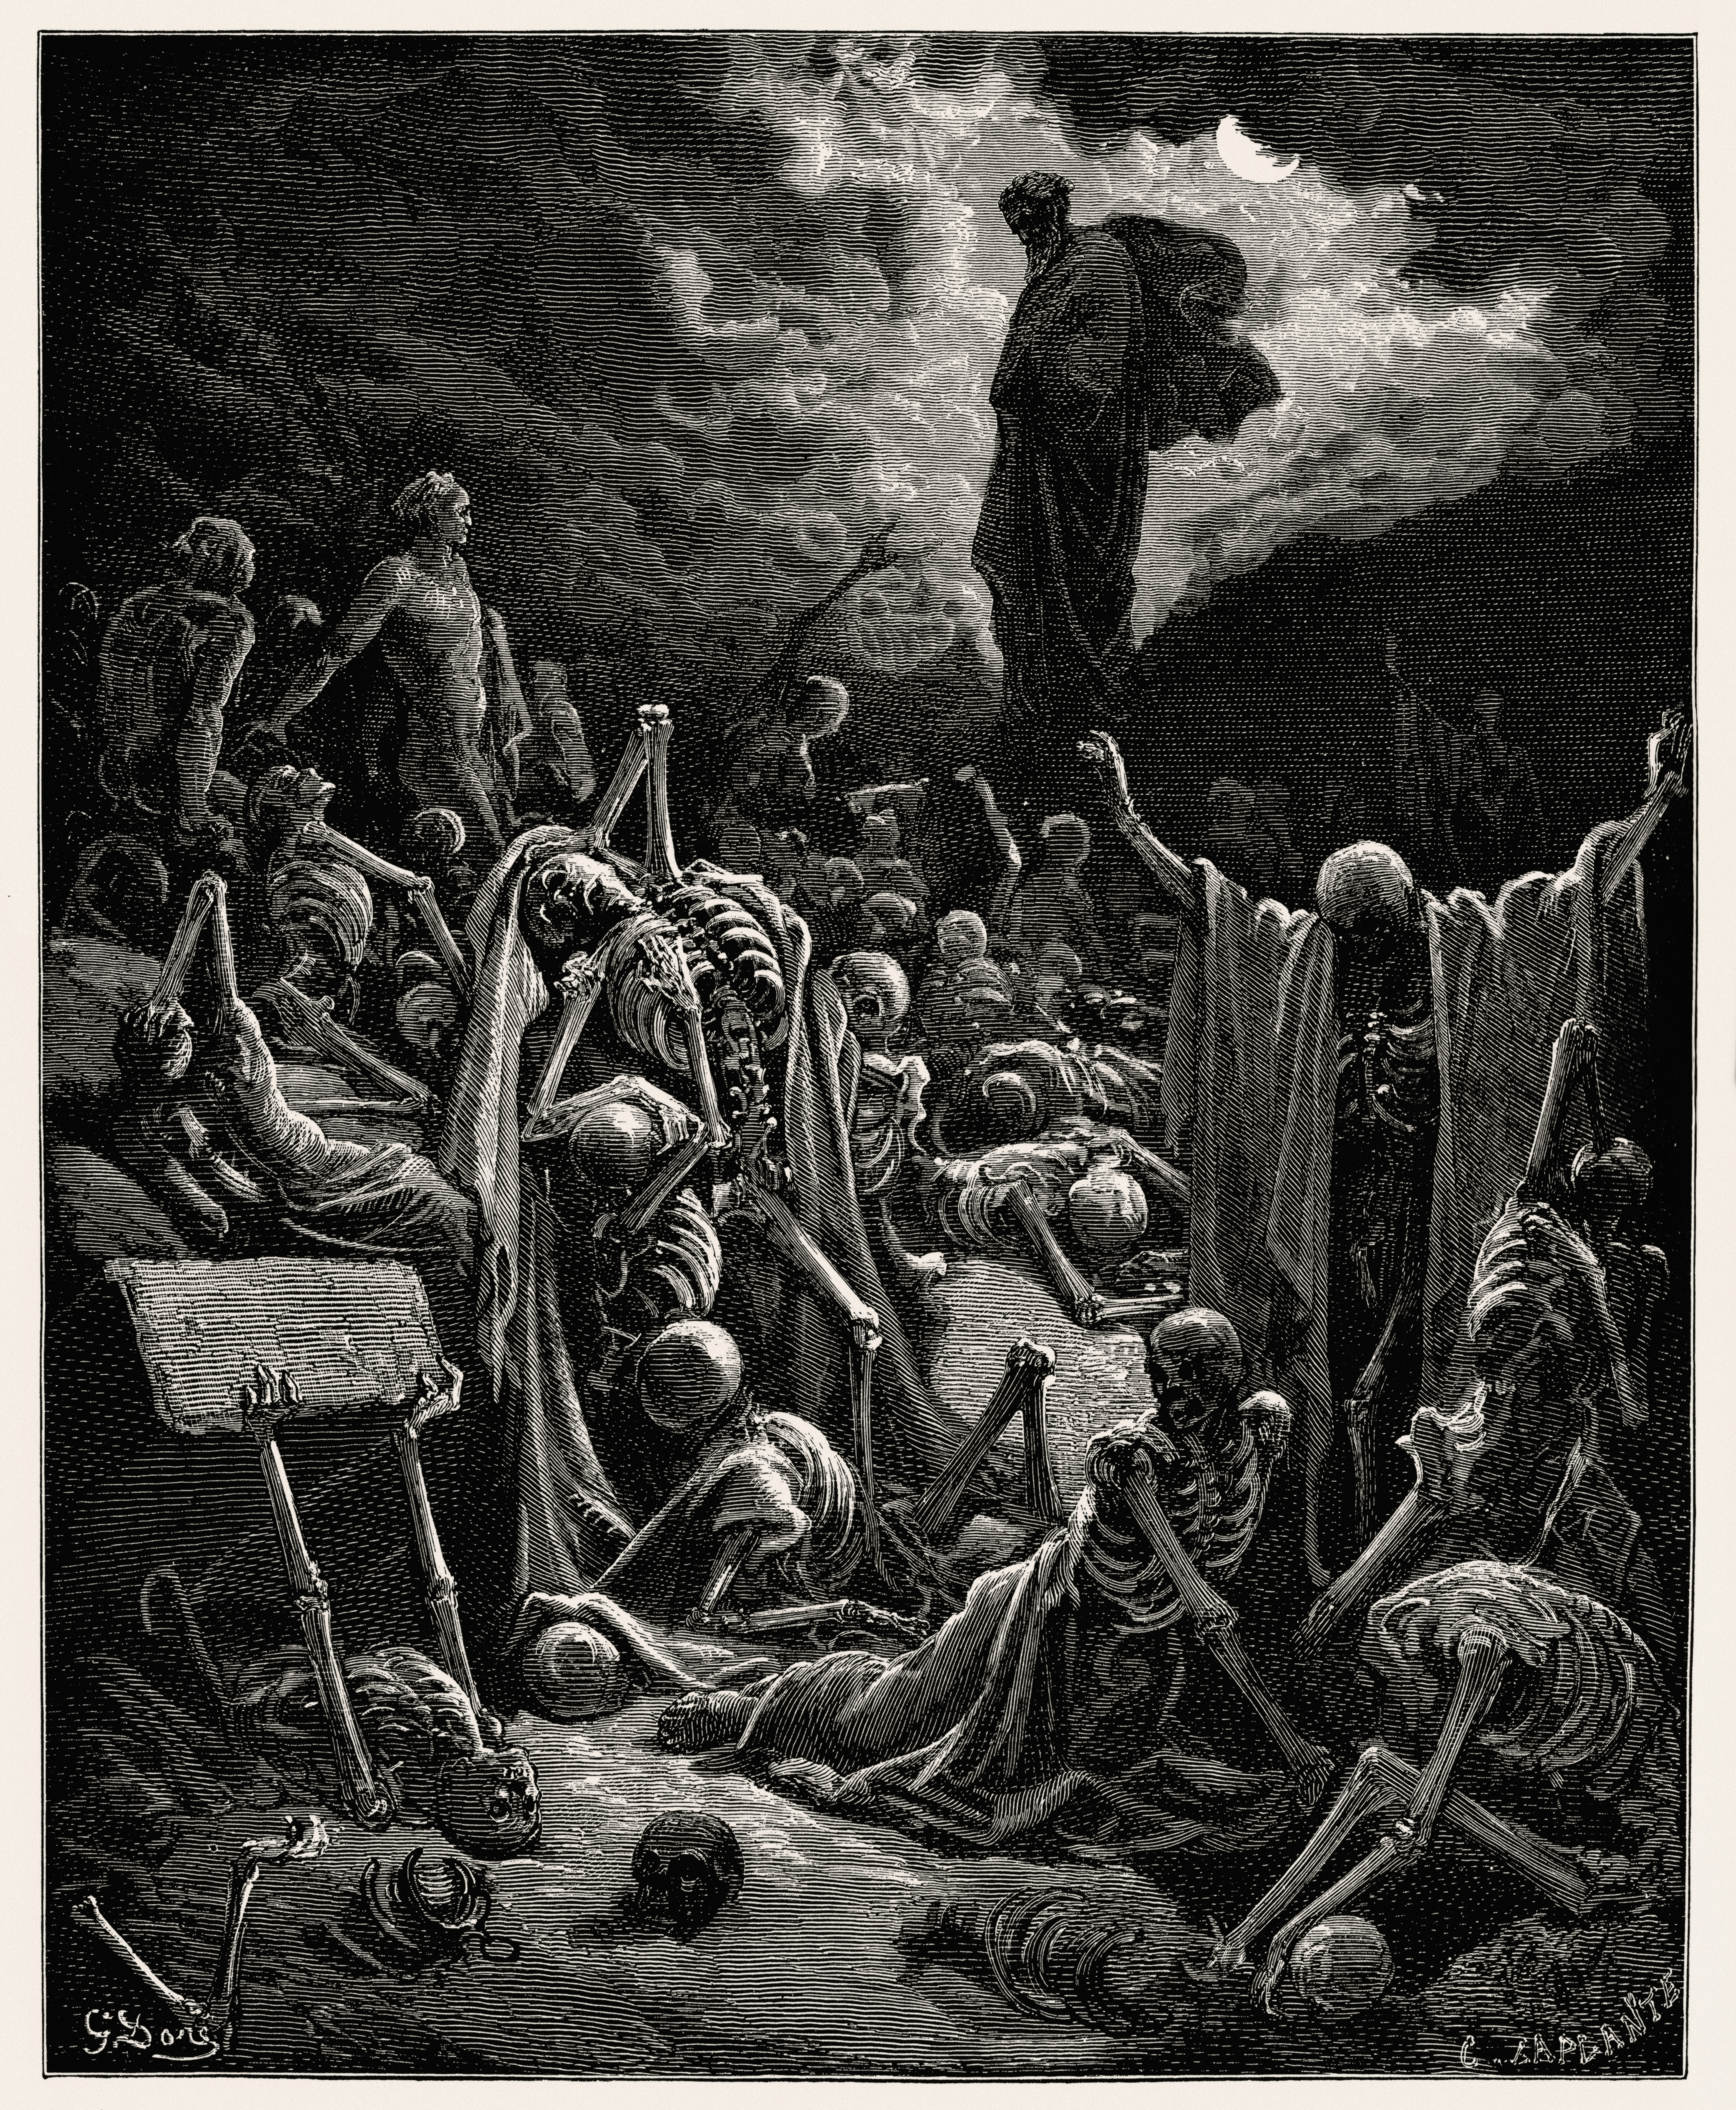 The Vision of the Valley of Dry Bones by Gustave Doré - 1866 - - private collection